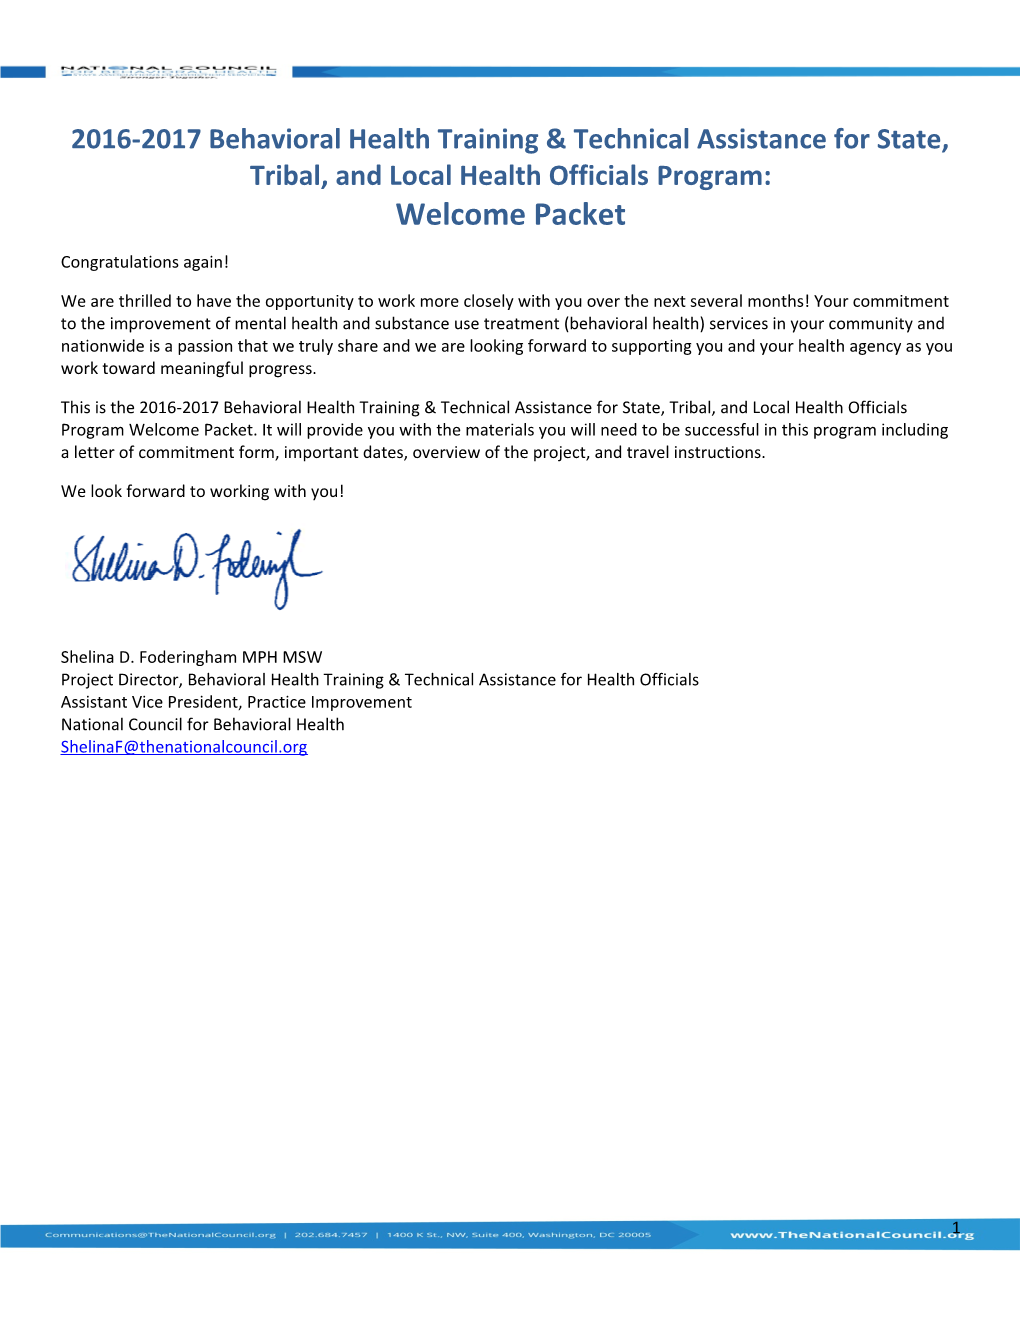 2016-2017 Behavioral Health Training & Technical Assistance for State, Tribal, and Local